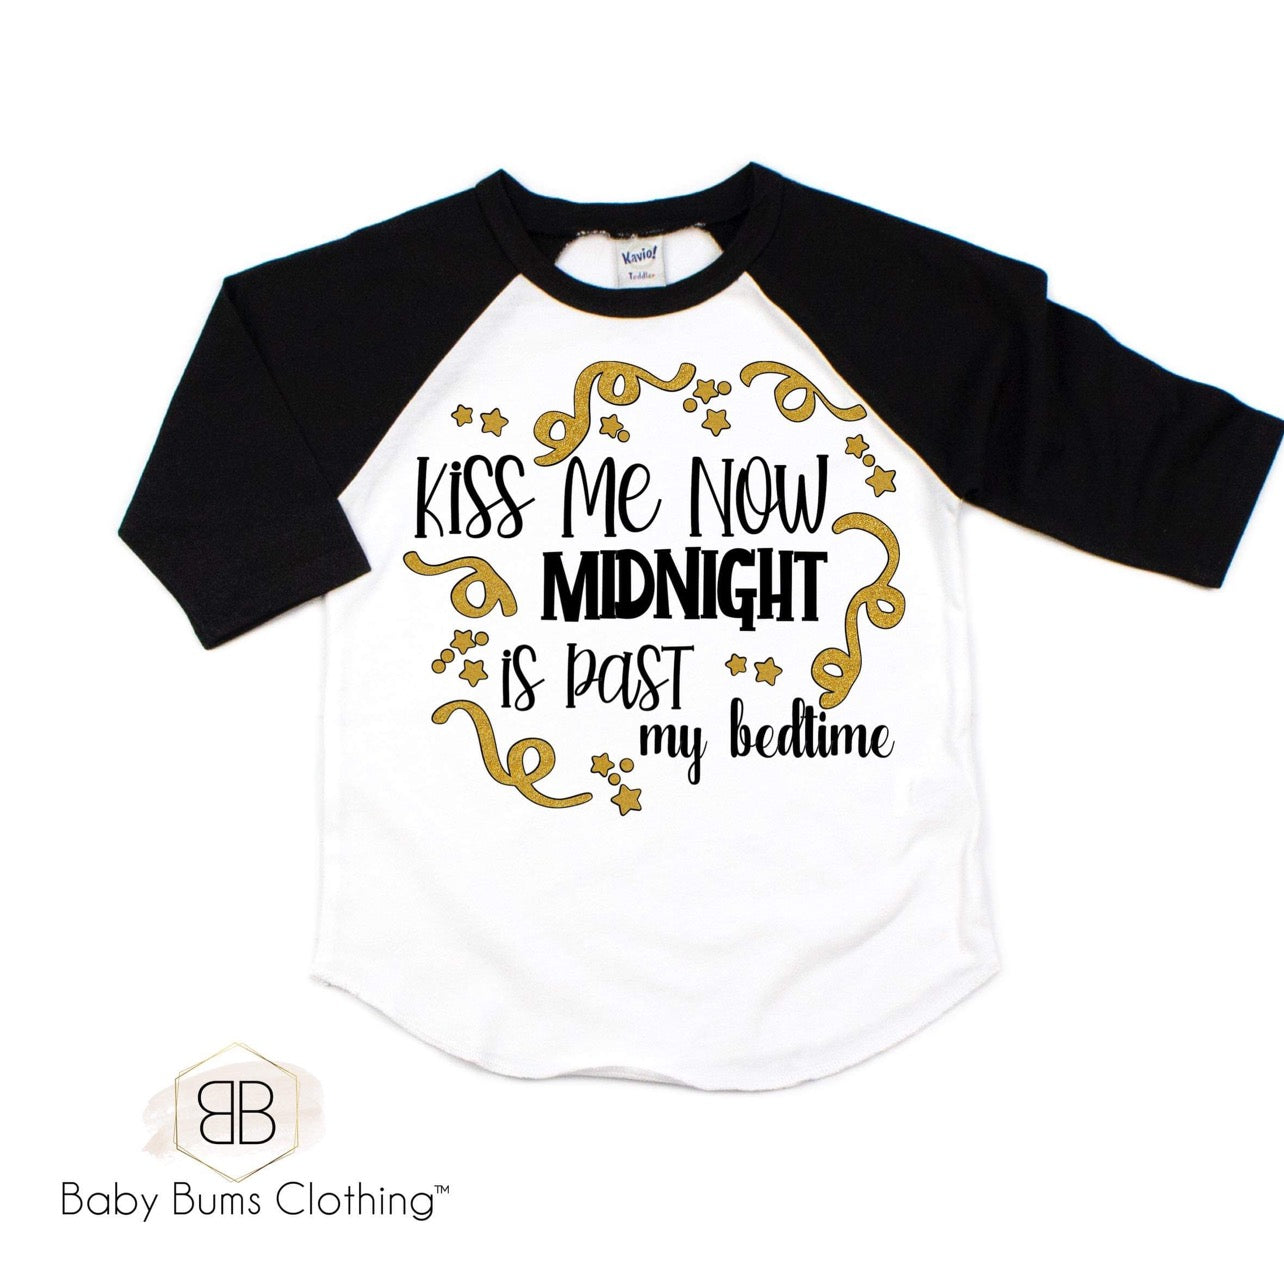 KISS ME NOW T-SHIRT - Baby Bums Clothing 